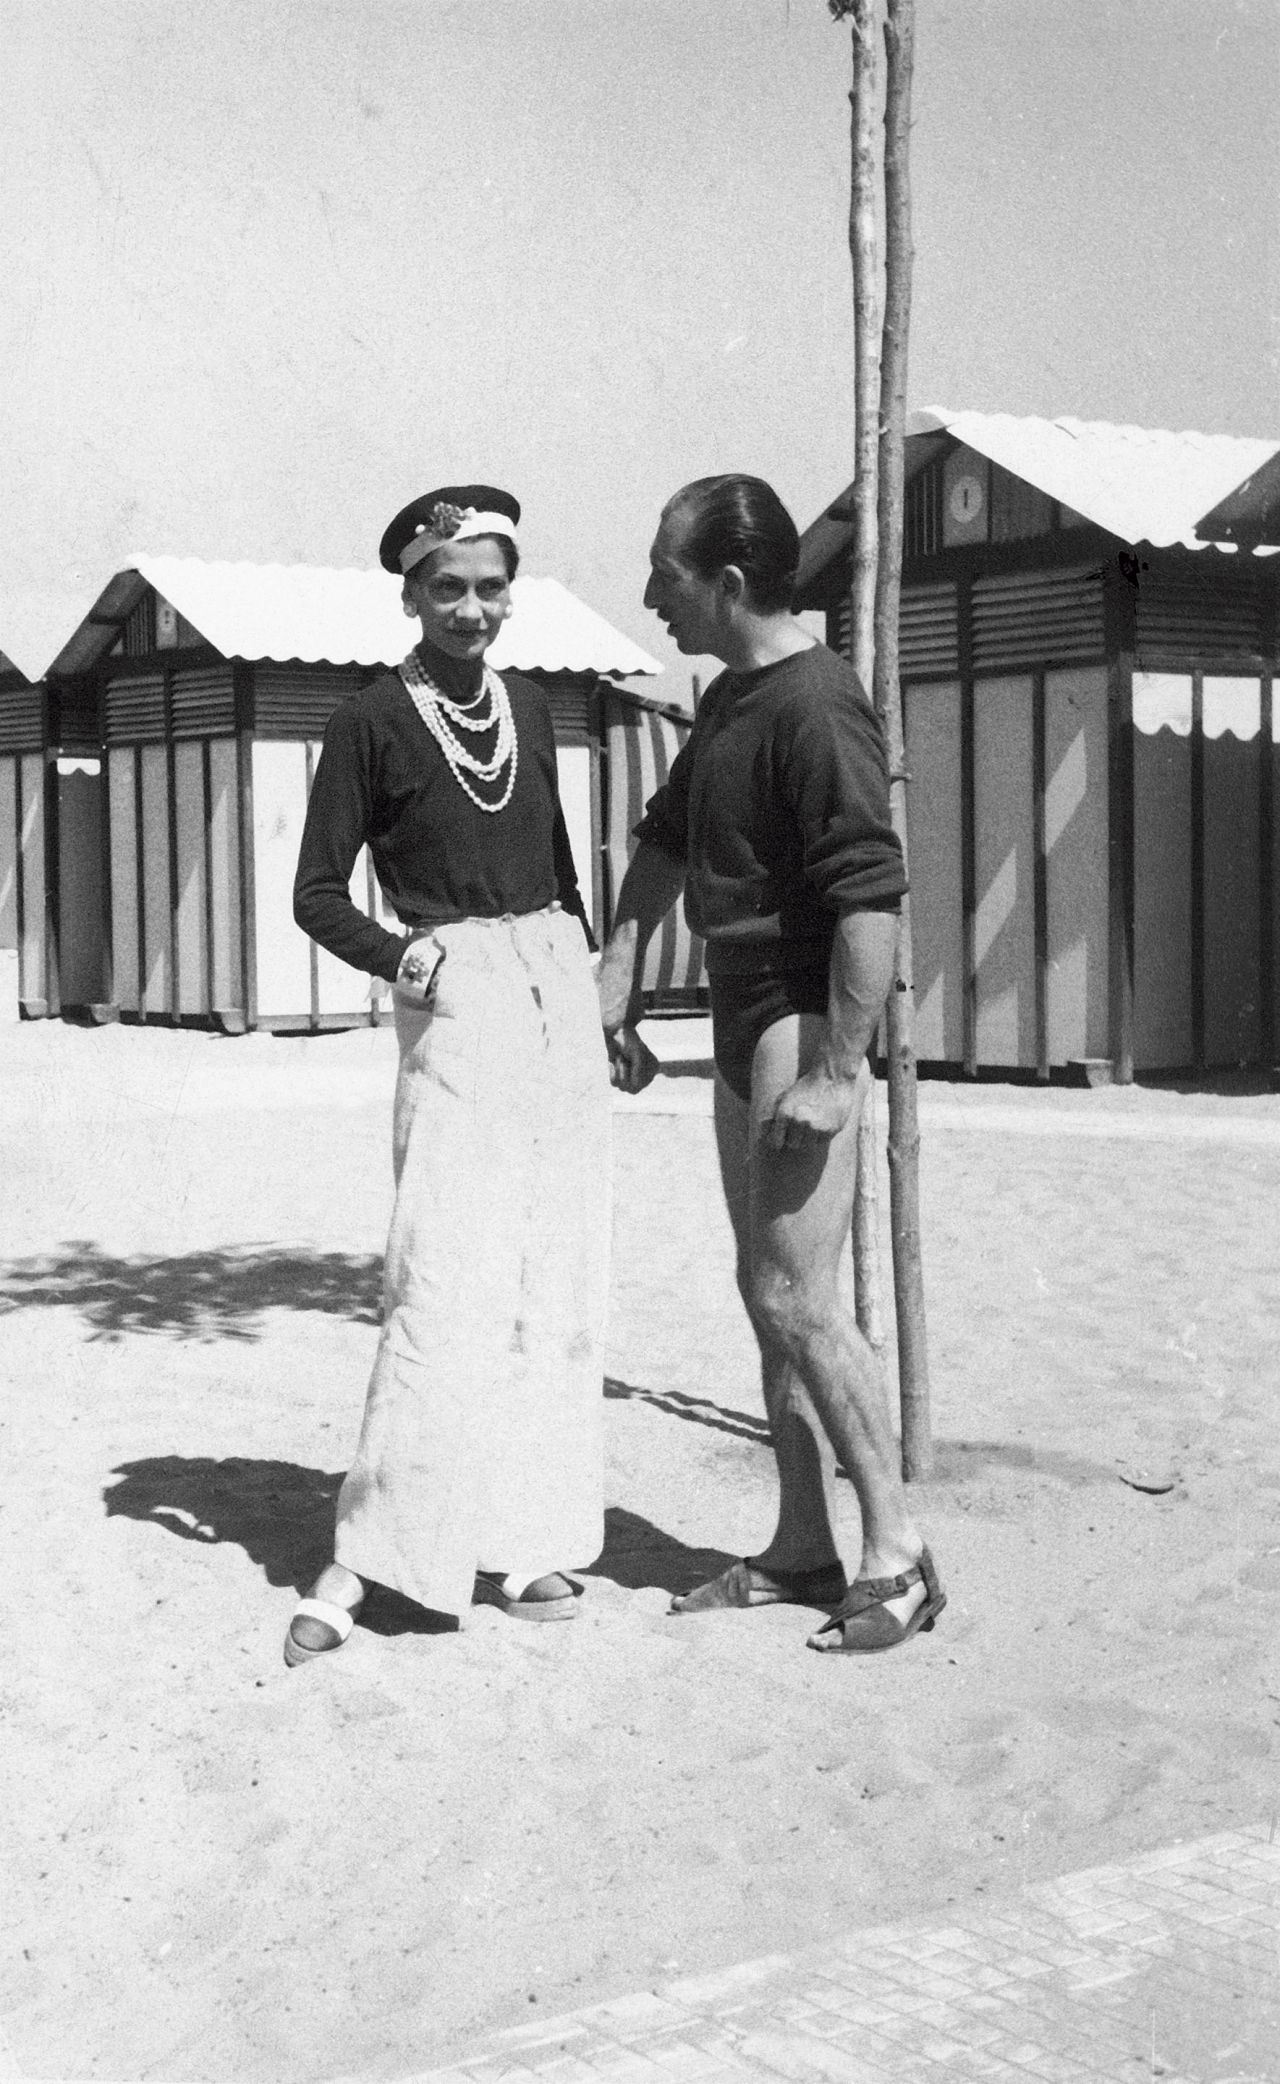 French fashion designer Coco Chanel, pictured here in wide trouser and sailor-style cap, borrowed styles from traditional mariner professions. <br />"Chanel was such a pioneer -- she took inspiration from fishermens' work wear," explained Butchart.